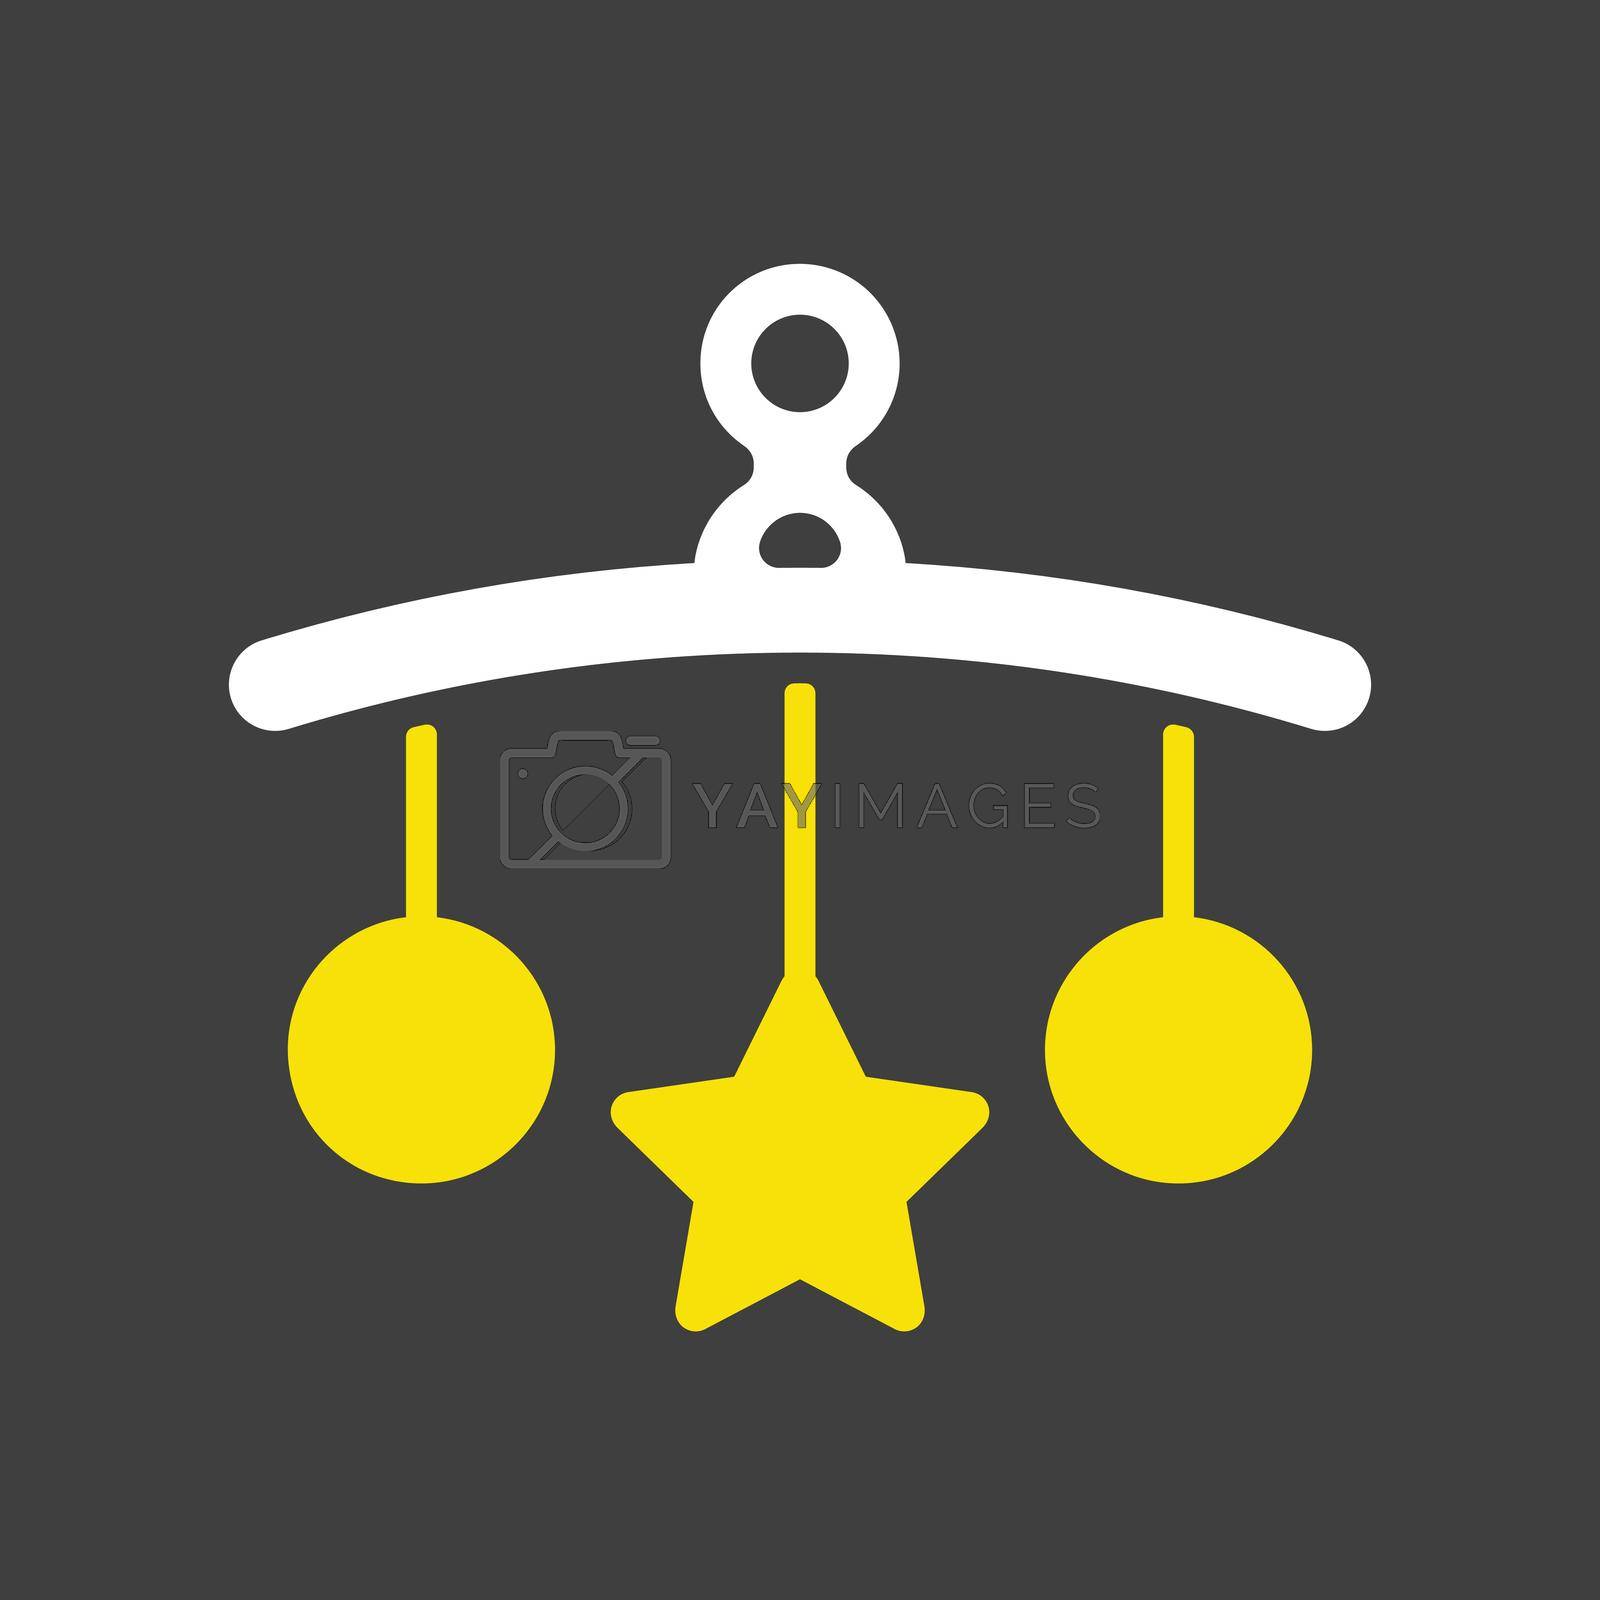 Royalty free image of Baby crib hanging toy glyph icon by nosik